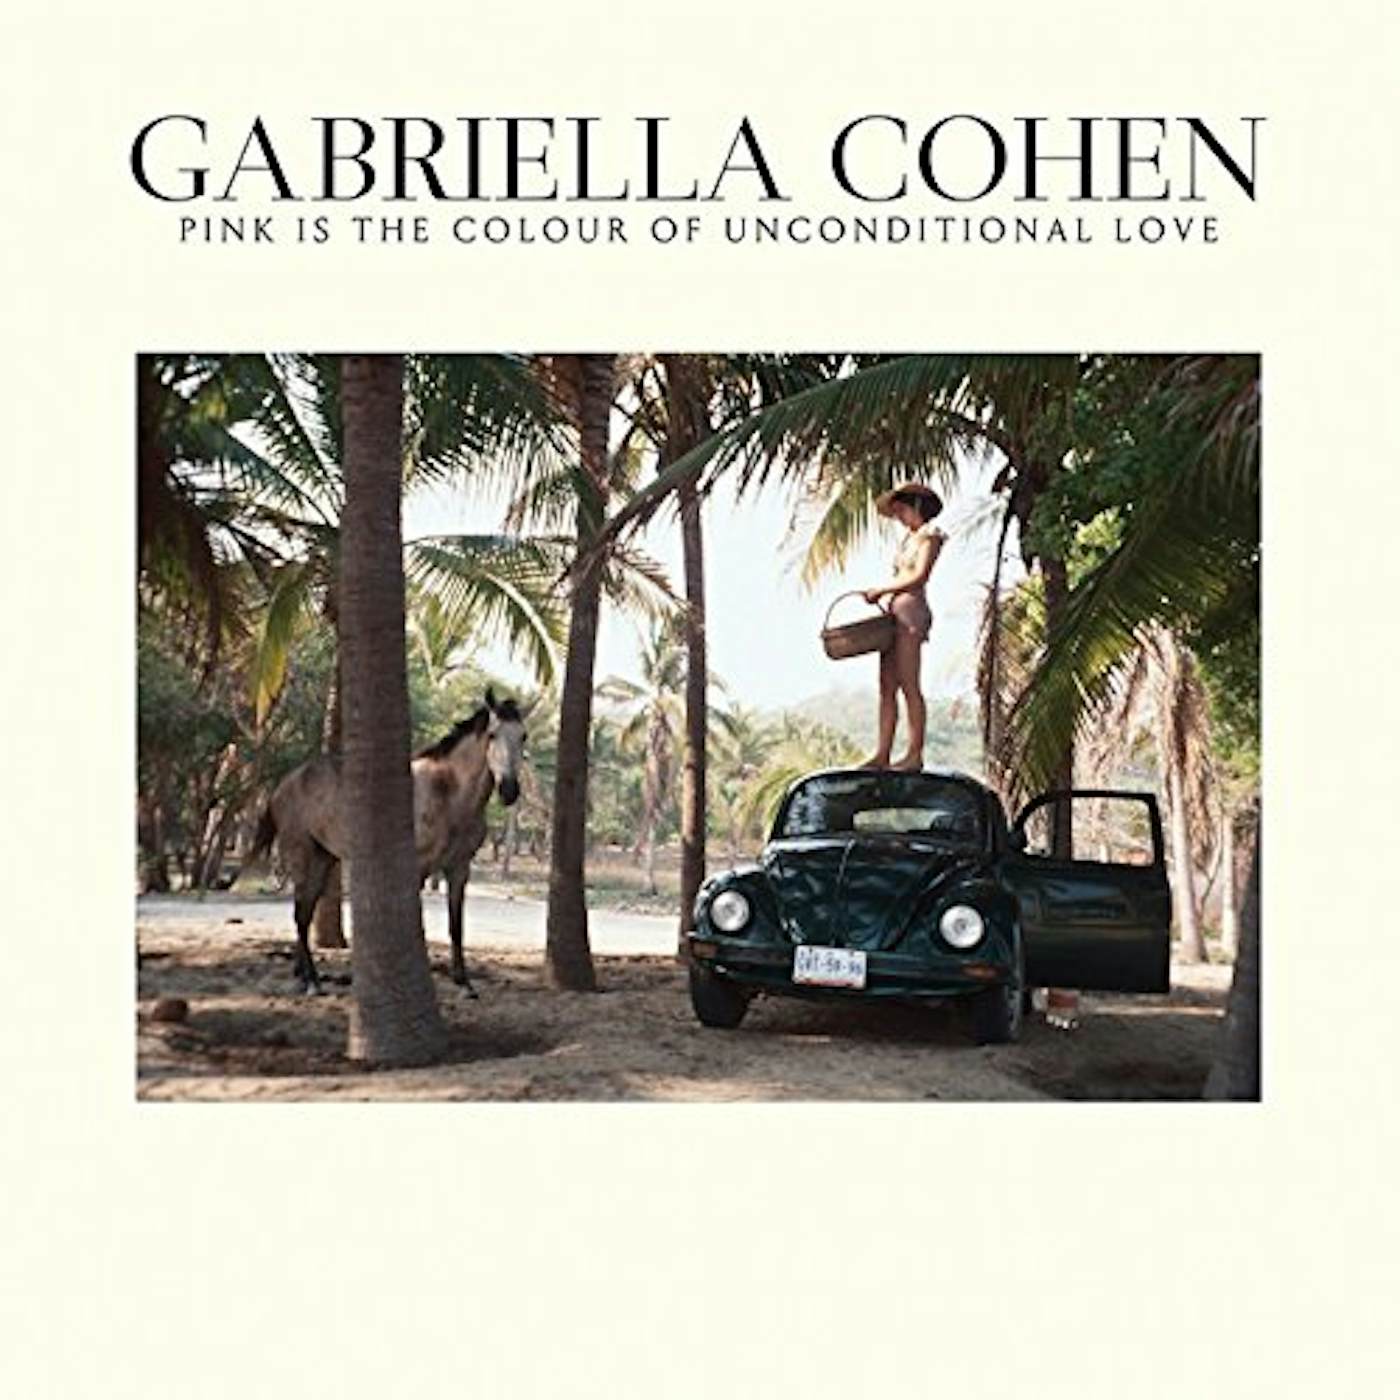 Gabriella Cohen PINK IS IN THE COLOUR OF UNCONDITIONAL LOVE Vinyl Record